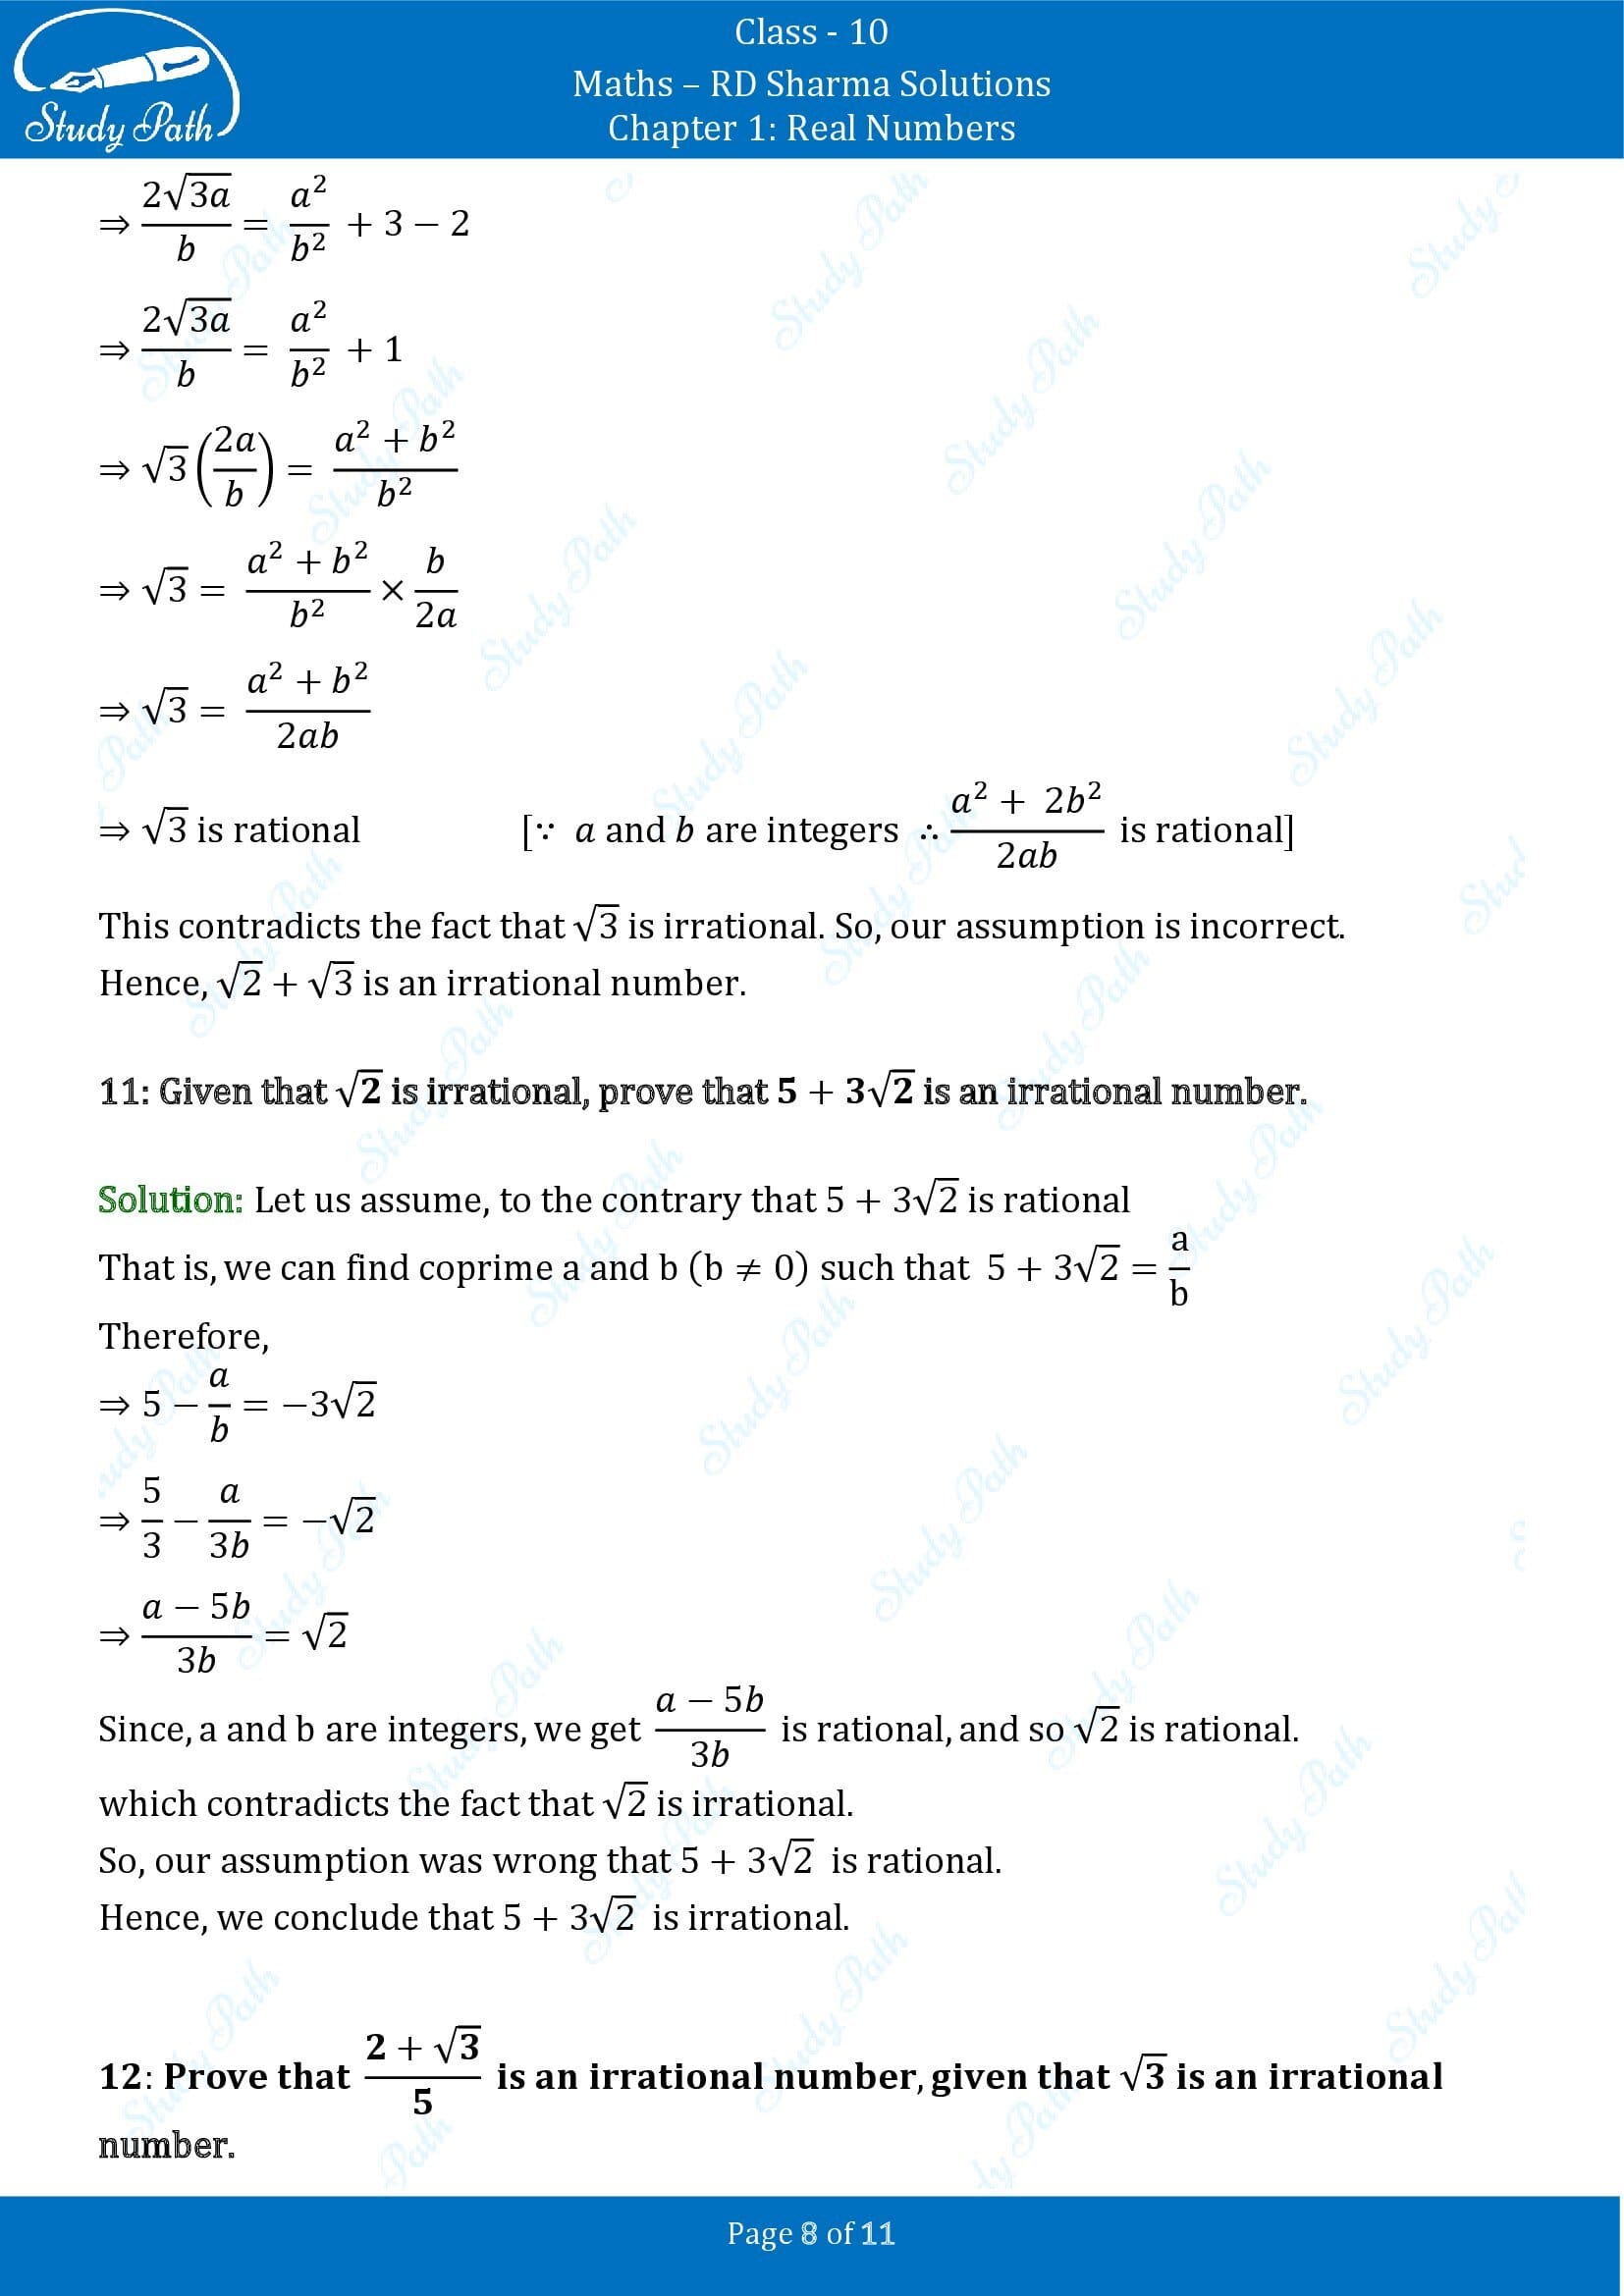 RD Sharma Solutions Class 10 Chapter 1 Real Numbers Exercise 1.5 00008